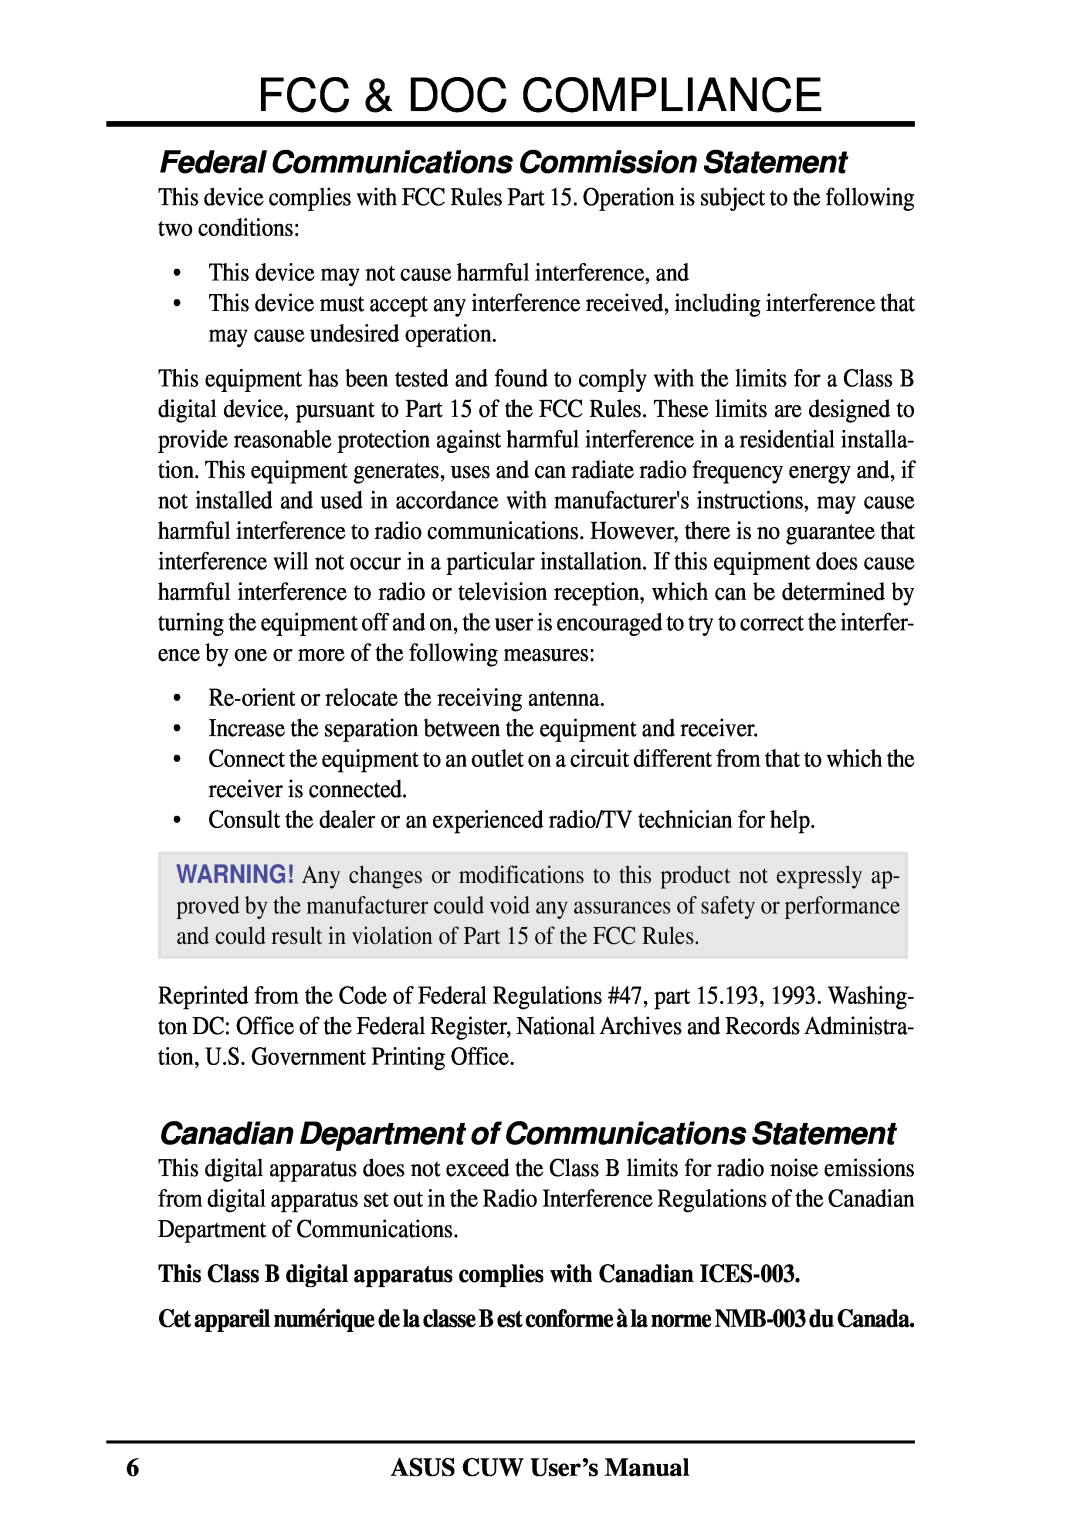 Asus 810 user manual Fcc & Doc Compliance, This Class B digital apparatus complies with Canadian ICES-003 